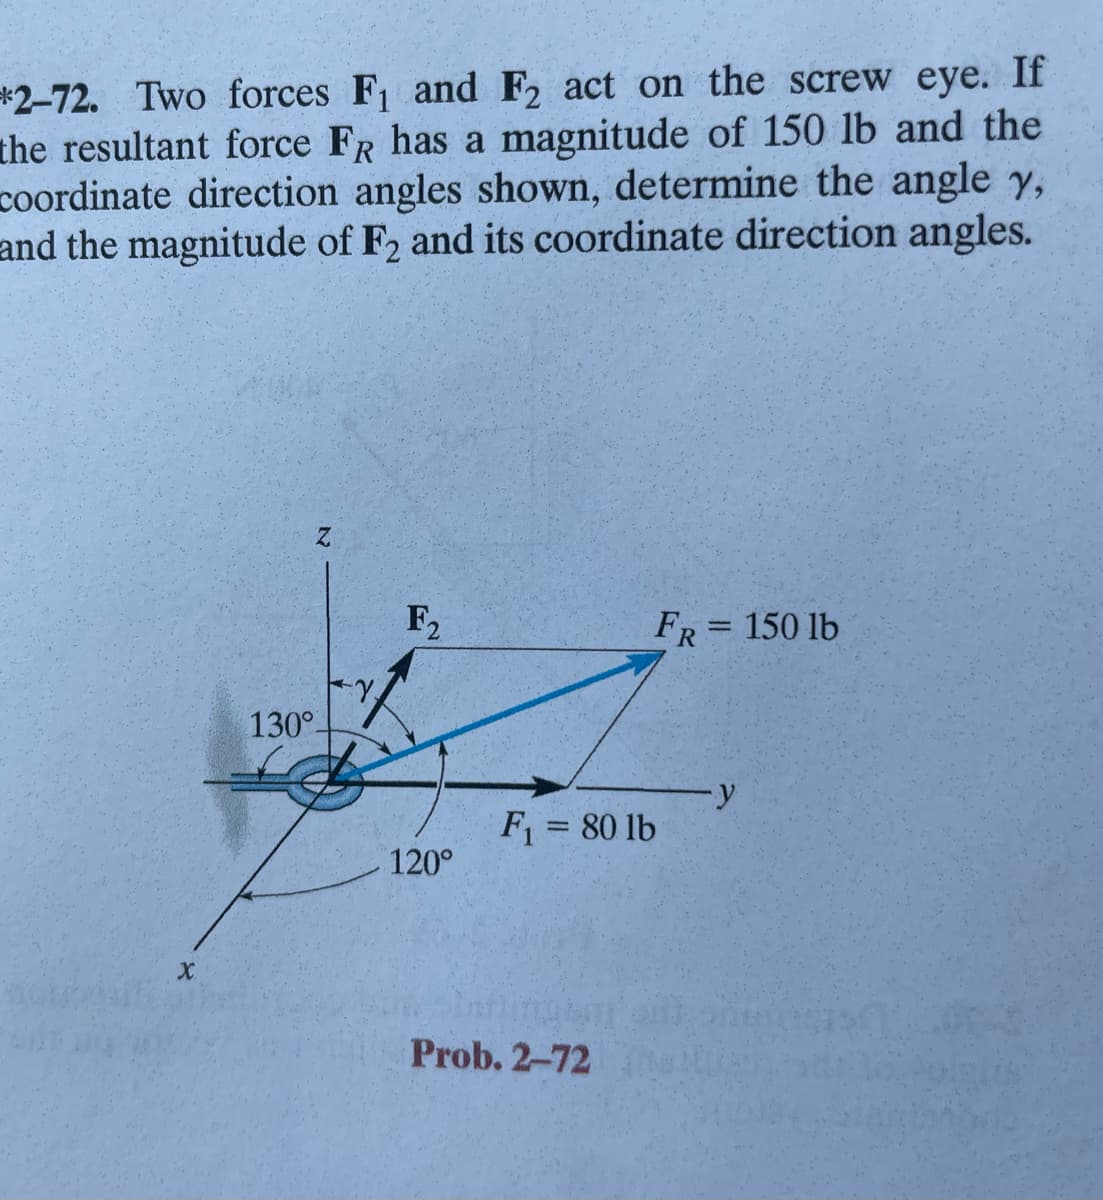 *2-72. Two forces F₁ and F2 act on the screw eye. If
the resultant force FR has a magnitude of 150 lb and the
coordinate direction angles shown, determine the angle y,
and the magnitude of F2 and its coordinate direction angles.
N
130°
*Y₂
F₂
120°
FR = 150 lb
F₁ = 80 lb
Prob. 2-72
Polgus